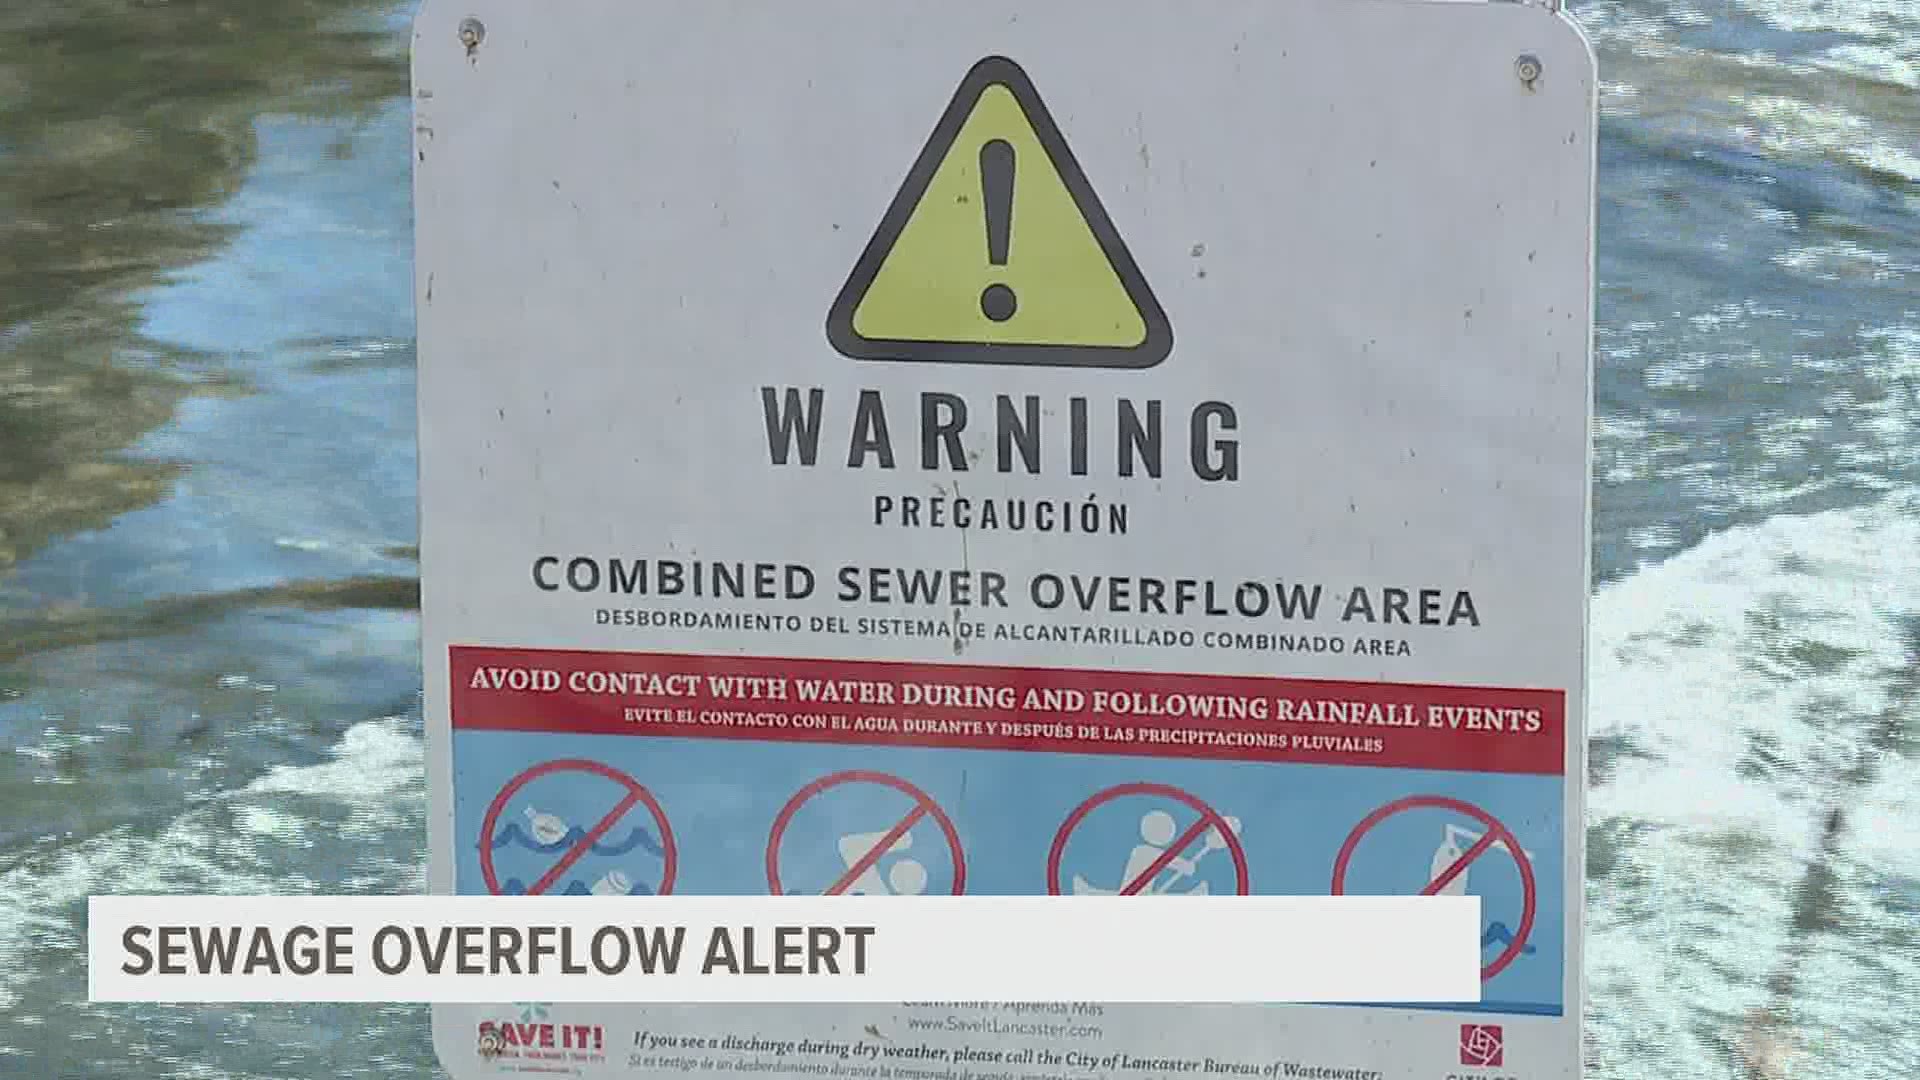 If you see lights which are located near the Conestoga River turn red or yellow, people do not have the green light to enter the water. Sewage is flowing.